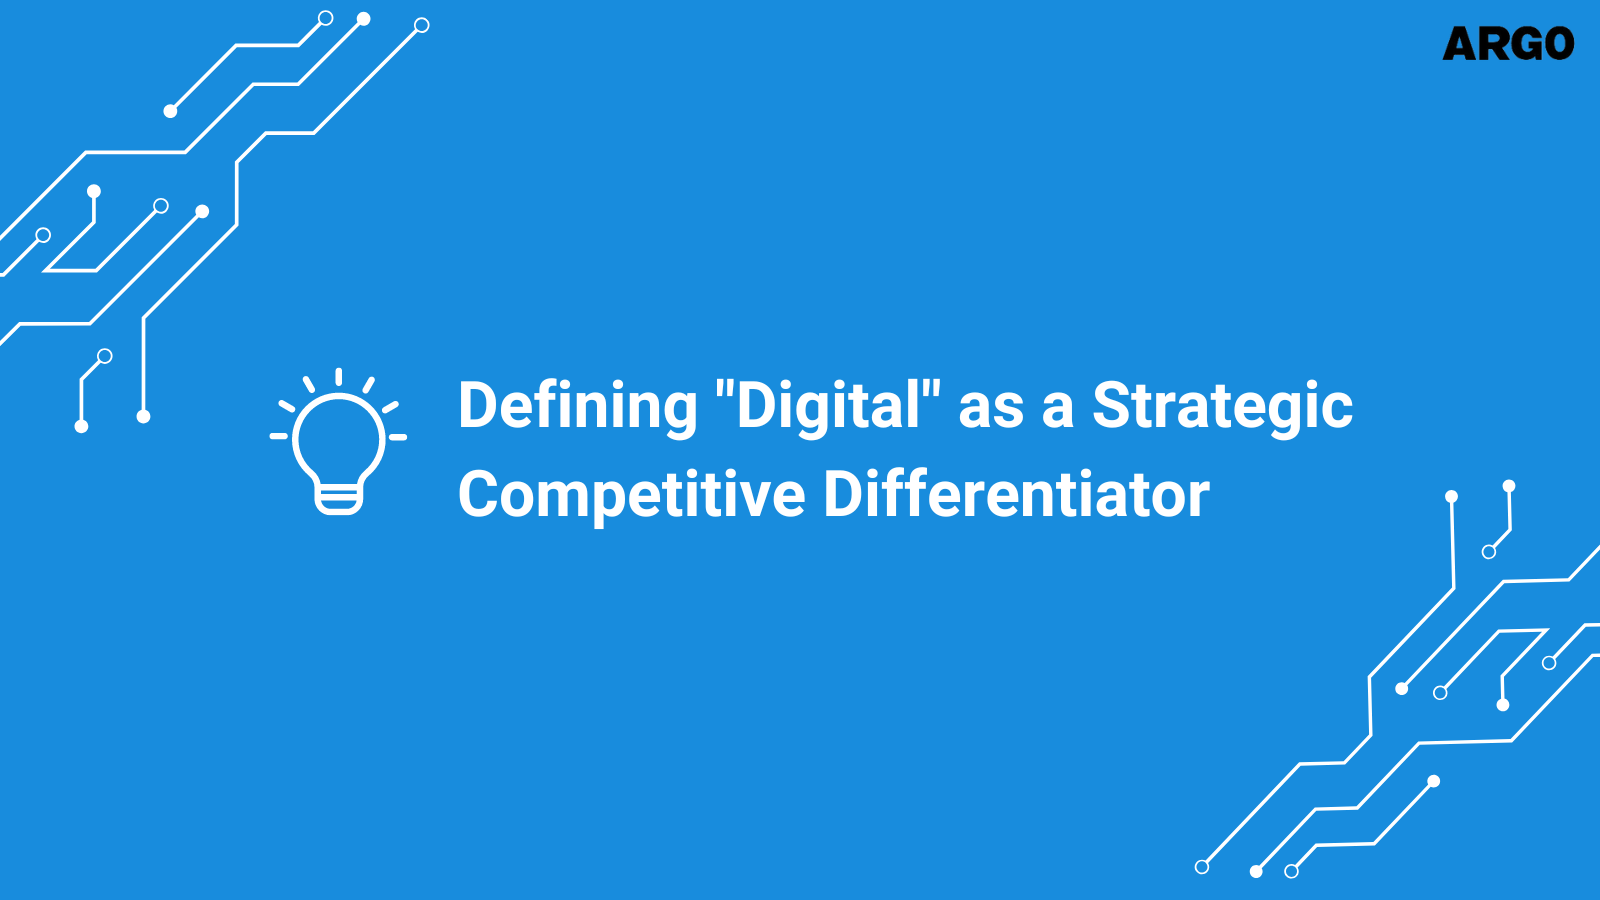 Defining “Digital” as a Strategic Competitive Differentiator